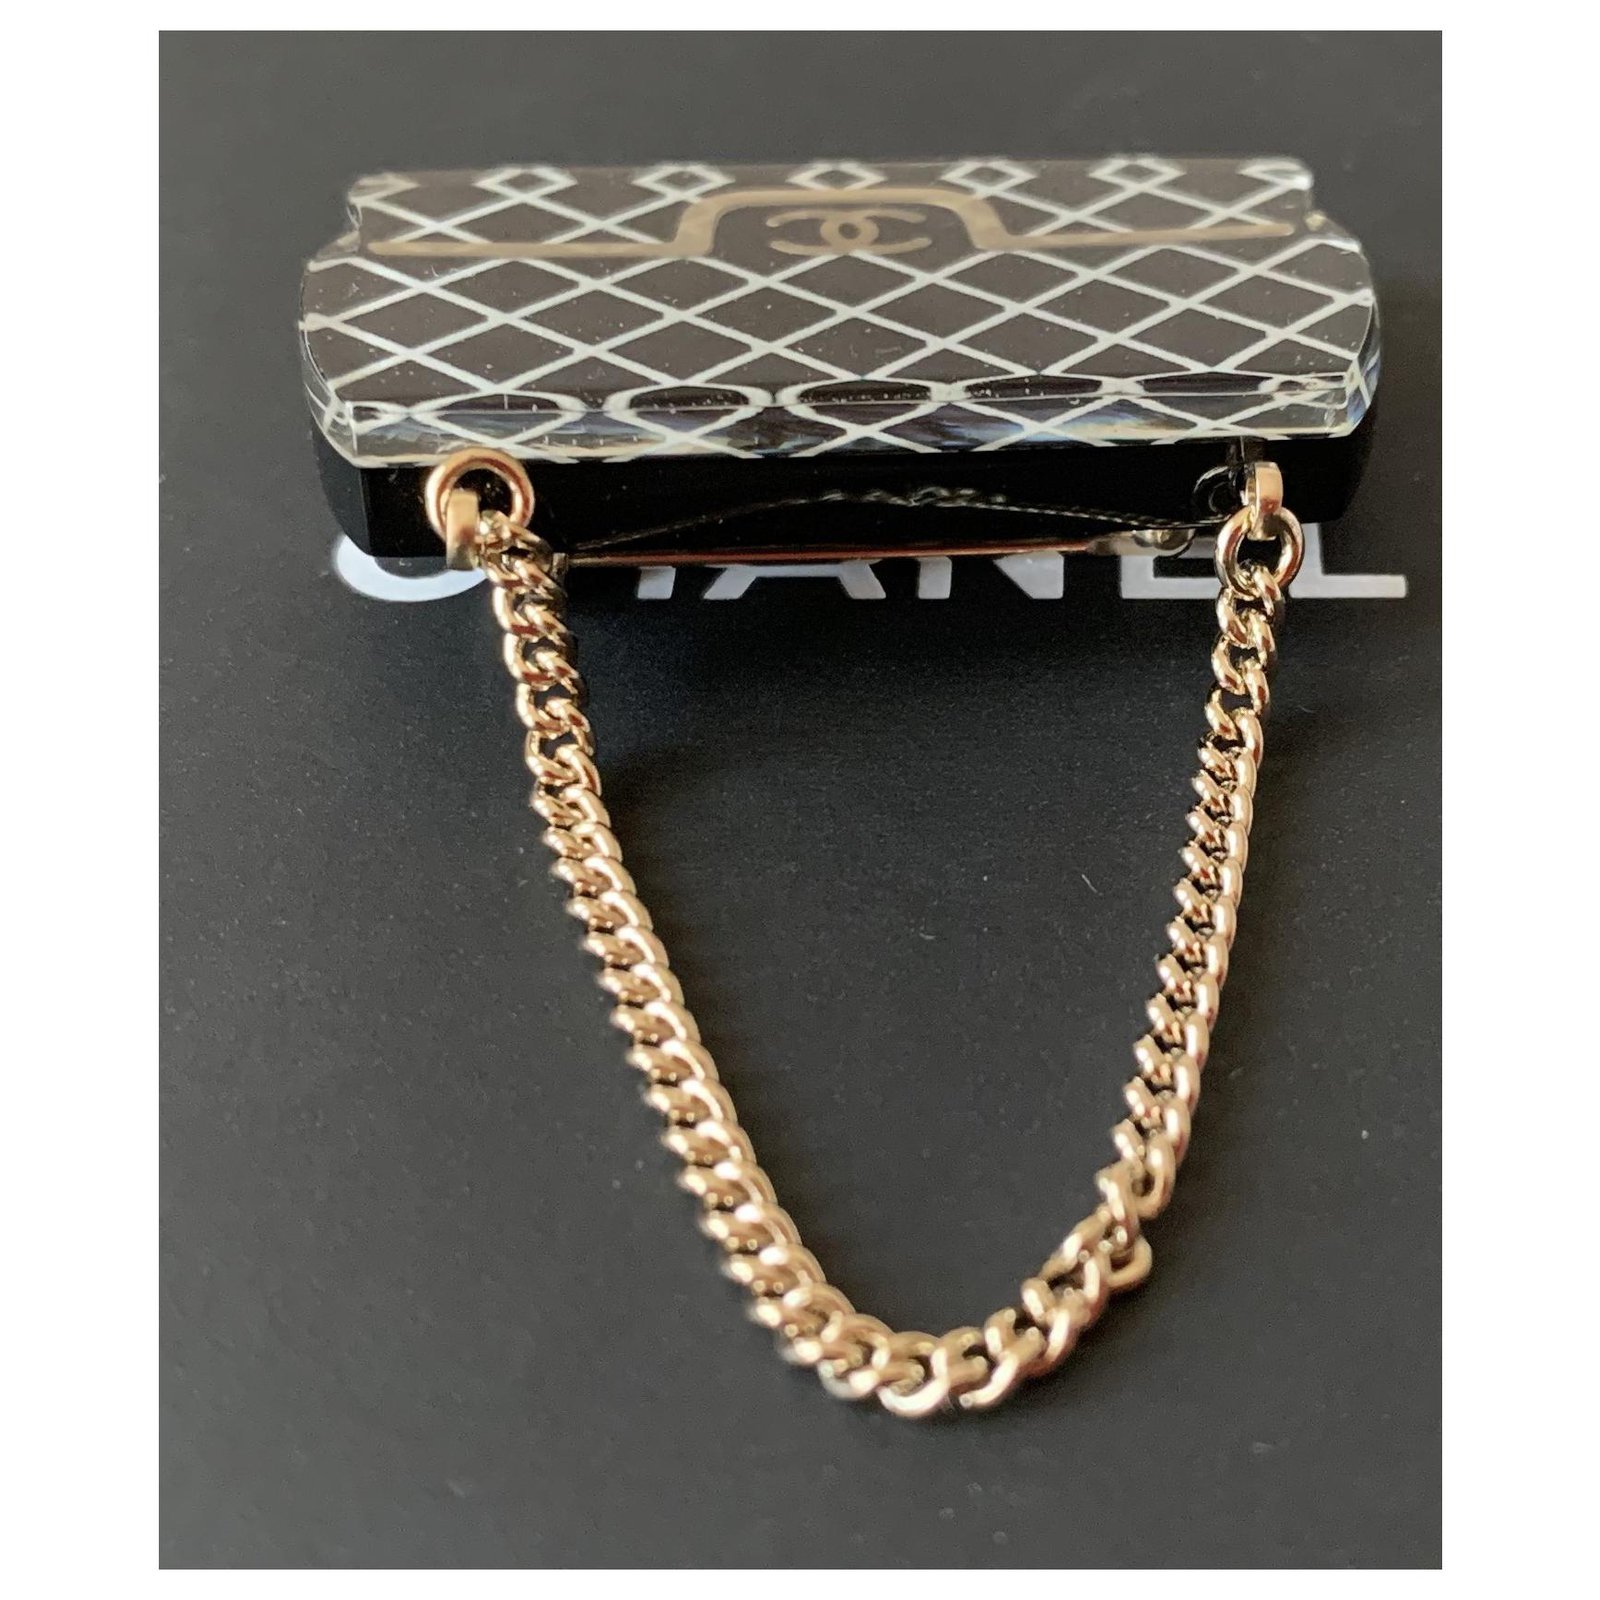 Chanel Black/white/gold Resin Classic Flap Bag Brooch Pin